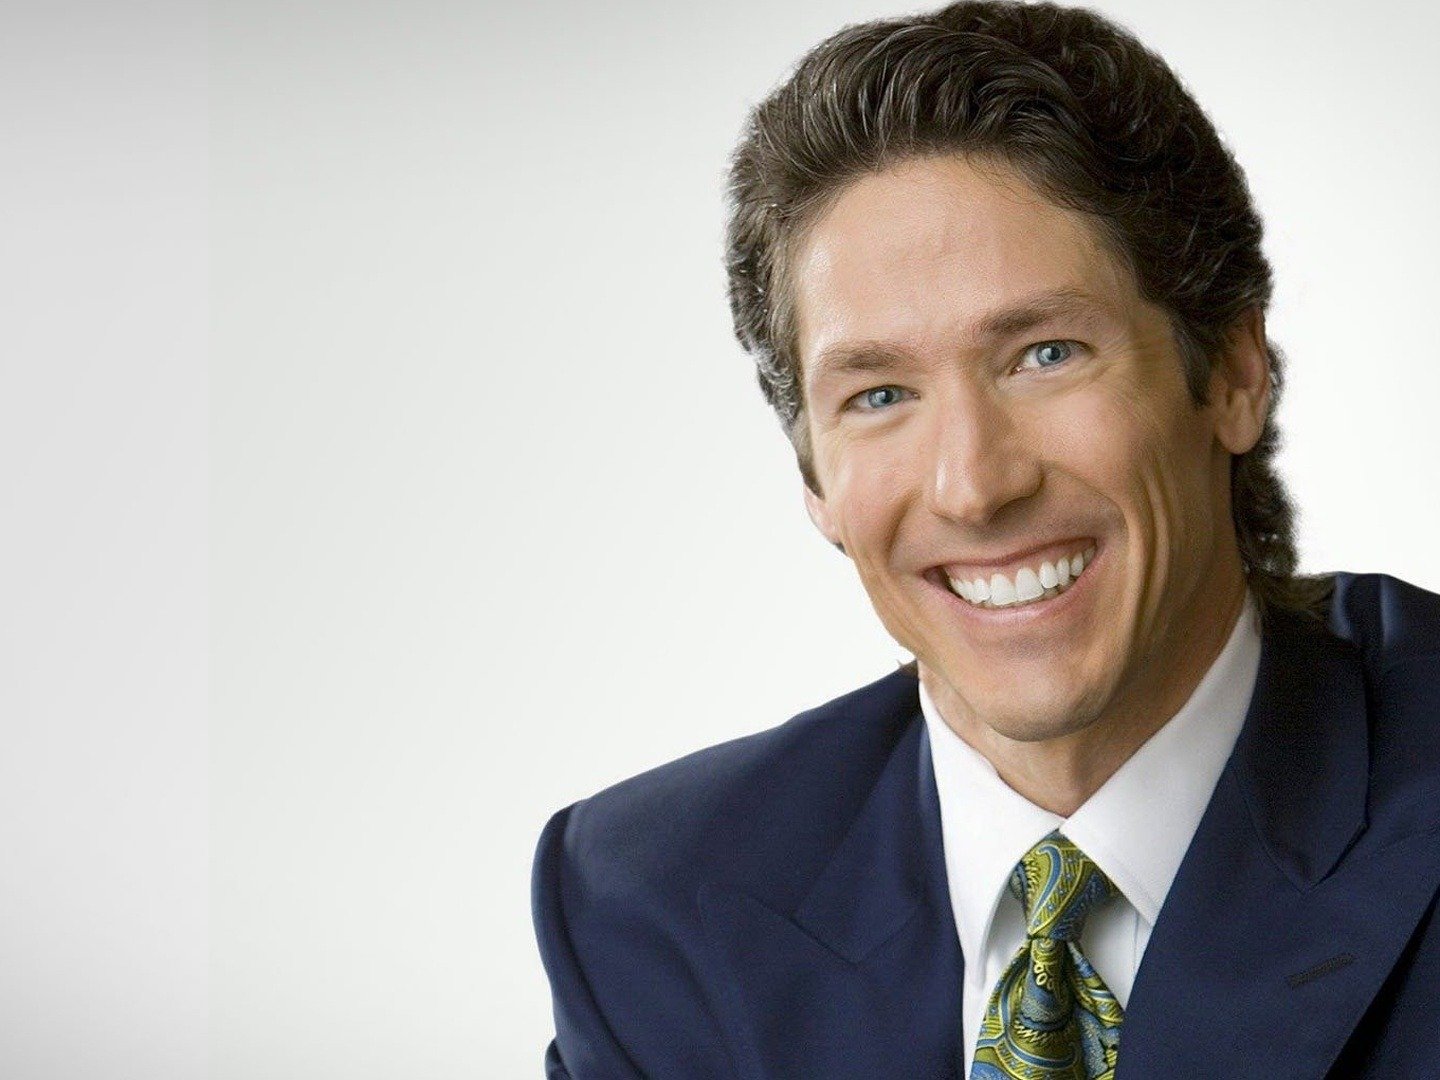 Joel Osteen on TV Channels and schedules